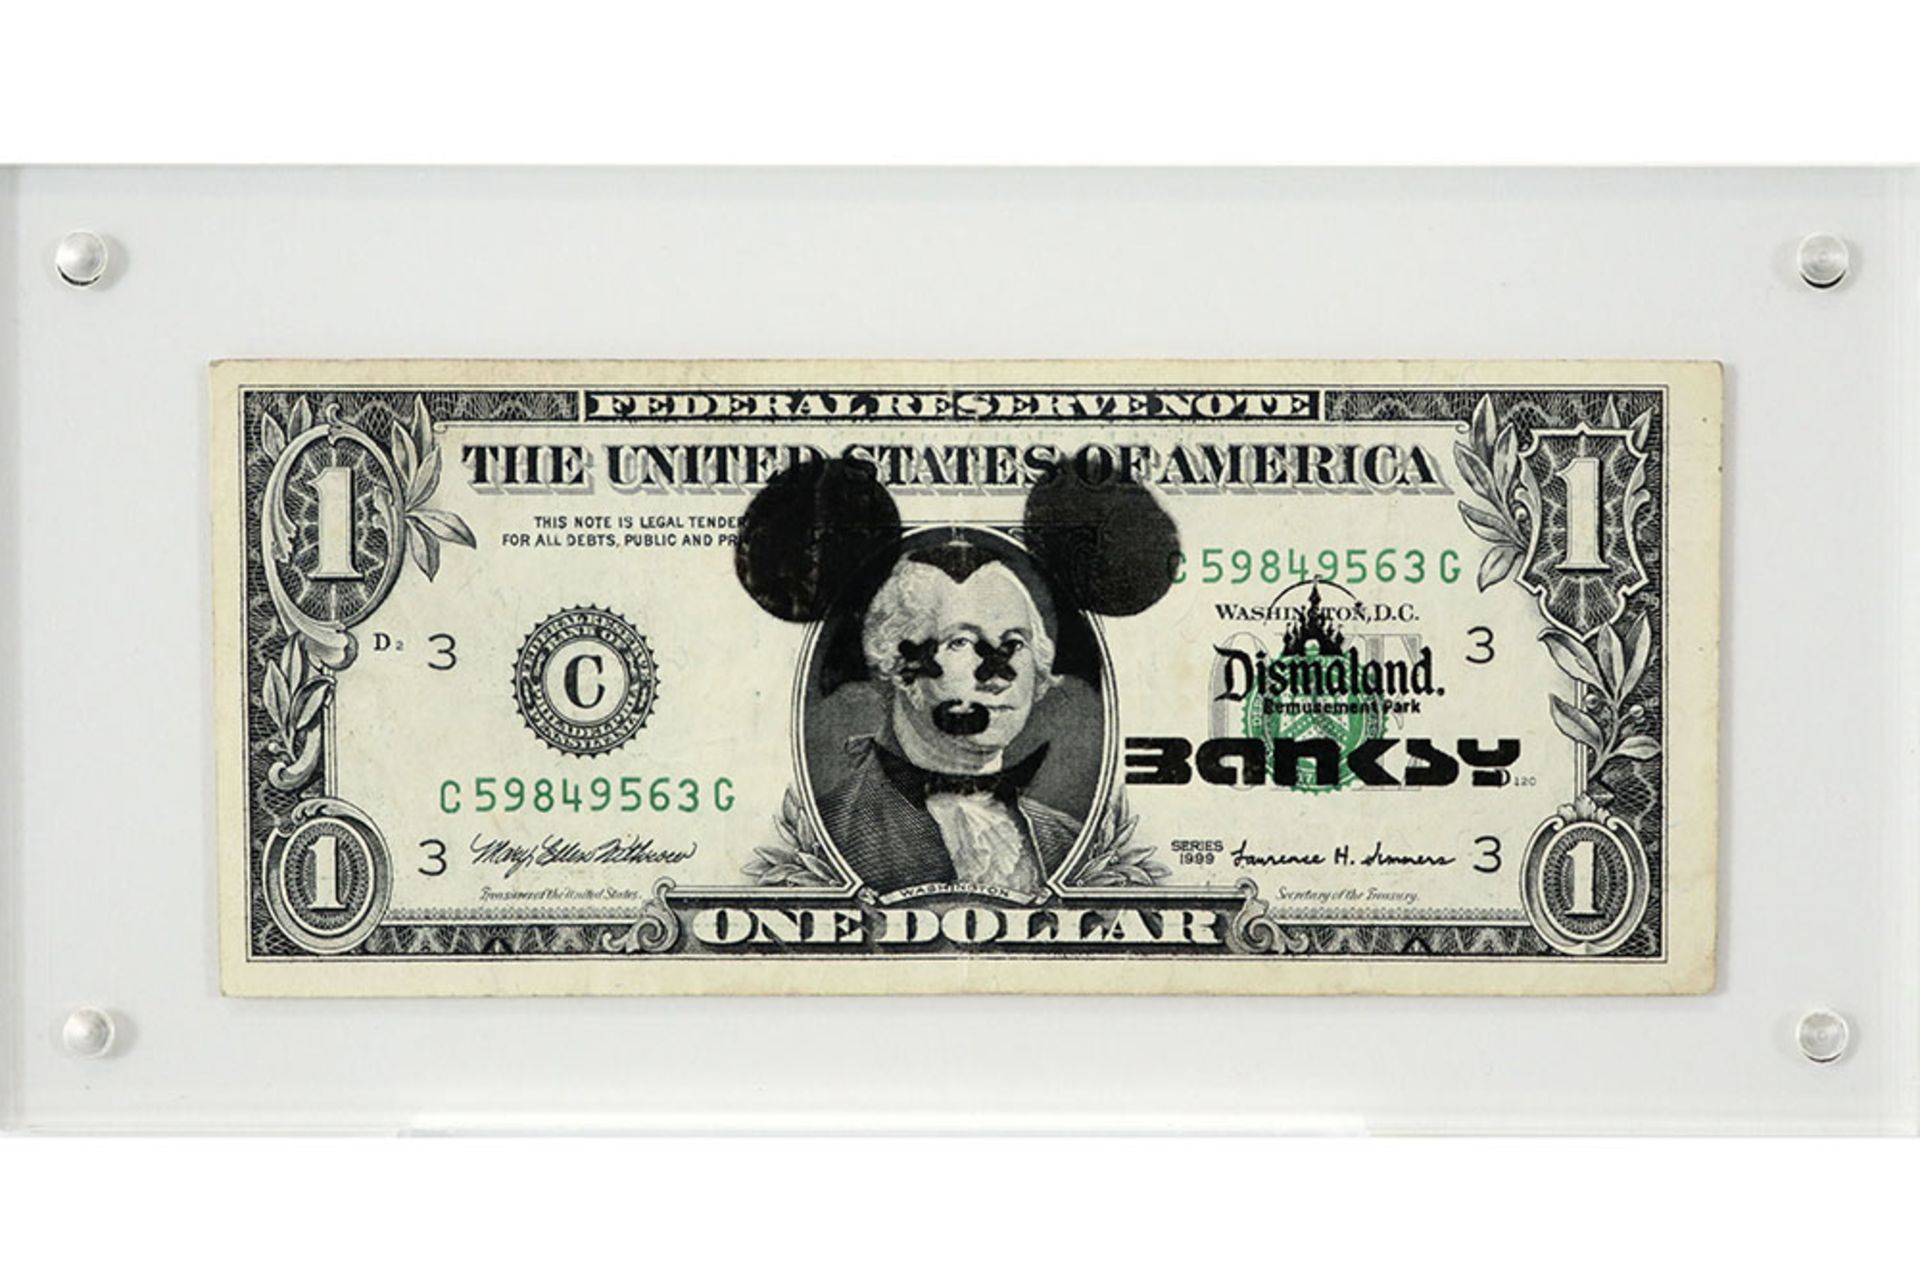 Banksy "Dismaland One Dollar" banknote print on canvas with Mickey Mouse dd 2015 with on the back - Image 2 of 3